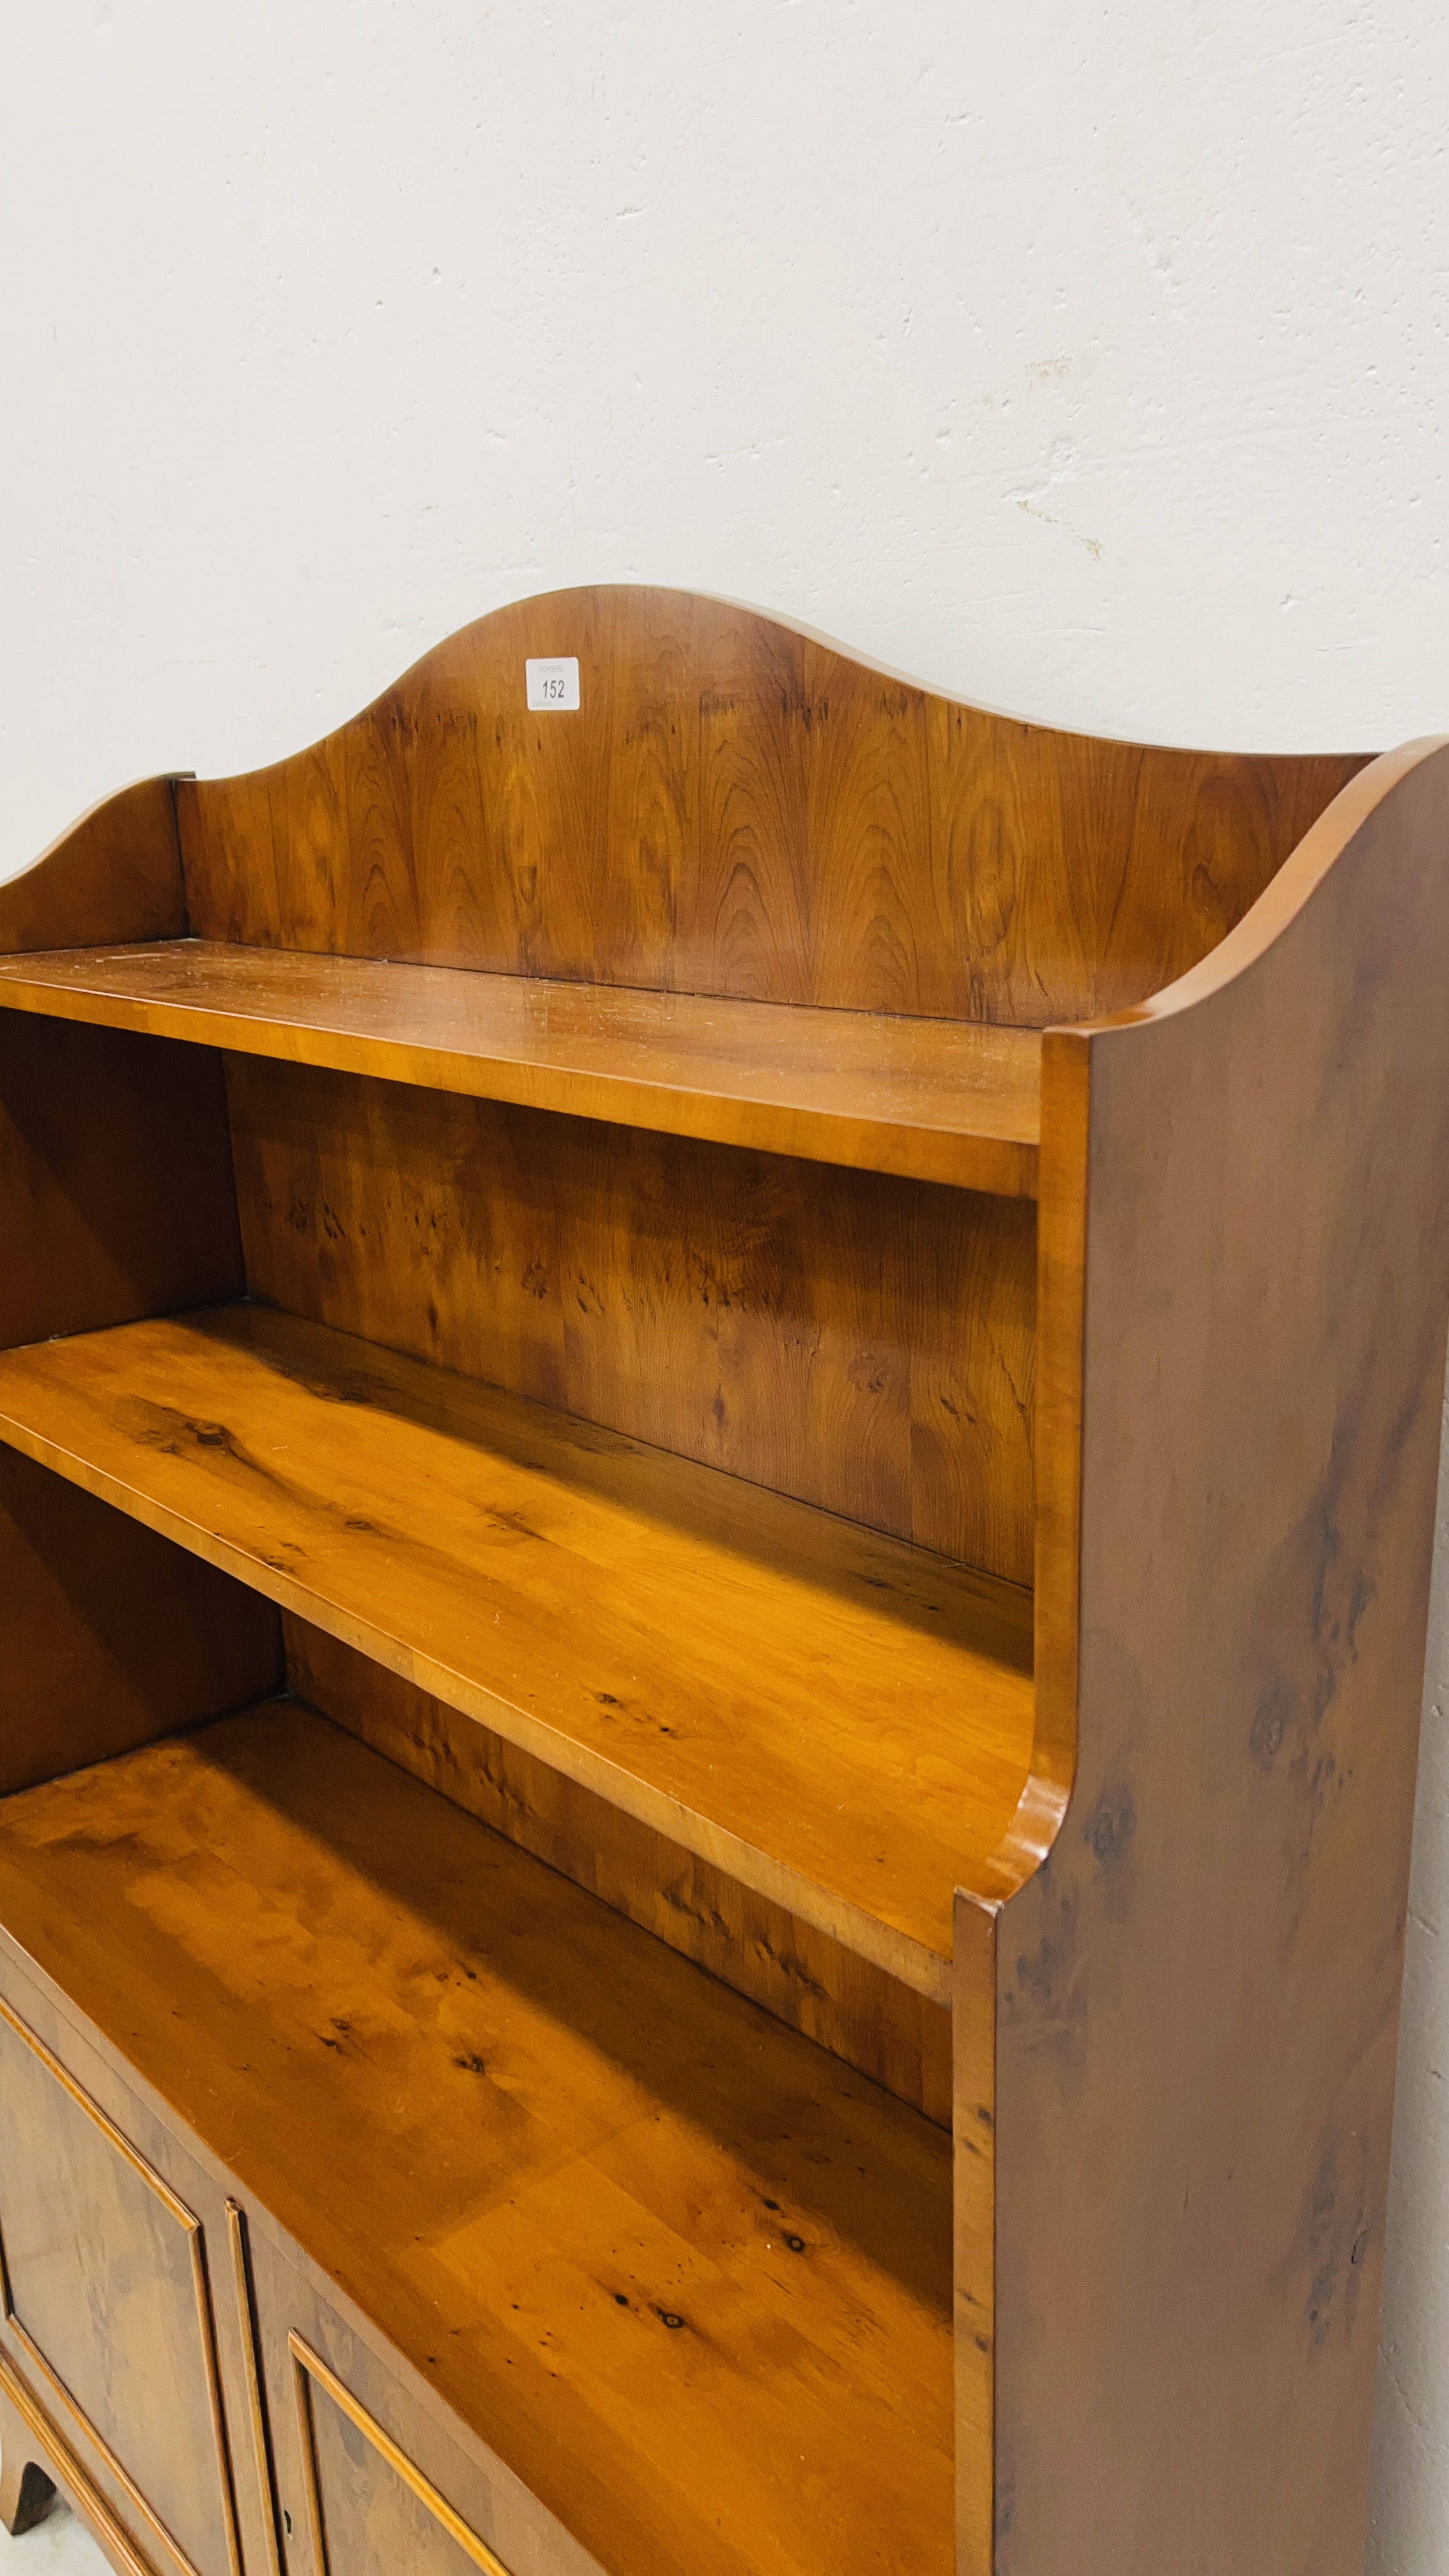 A GOOD QUALITY REPRODUCTION YEW WOOD FINISH BOOKSHELF WITH CABINET TO BASE WIDTH 85CM. DEPTH 27CM. - Image 3 of 5